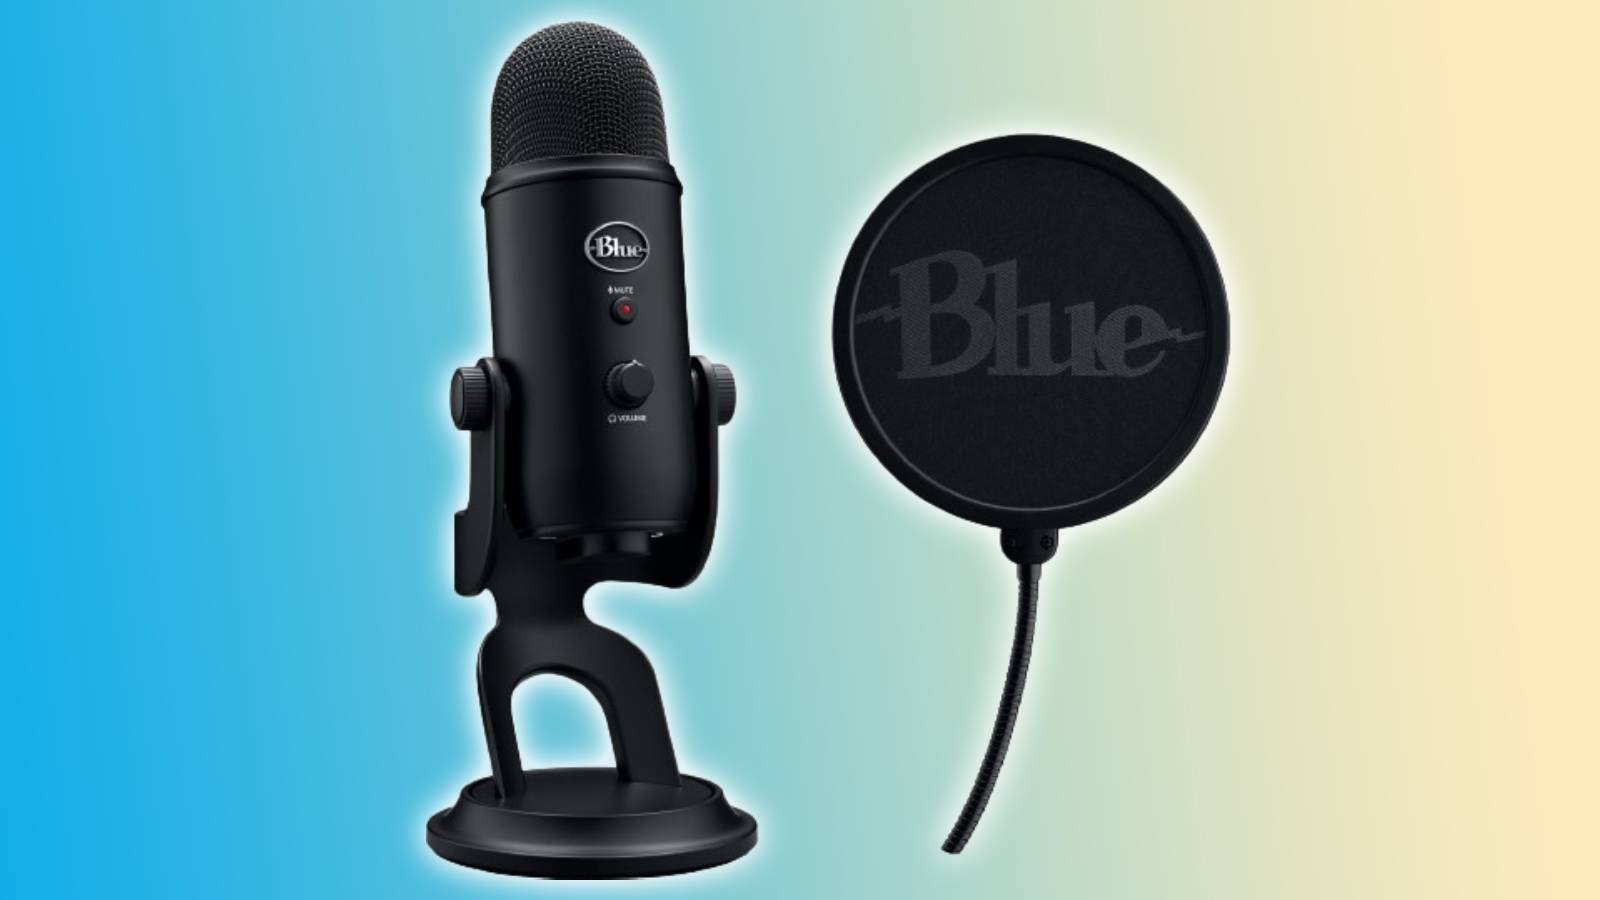 Image of the Blue Yeti Game Streaming Kit with Yeti USB Gaming Mic on a blue and yellow background.